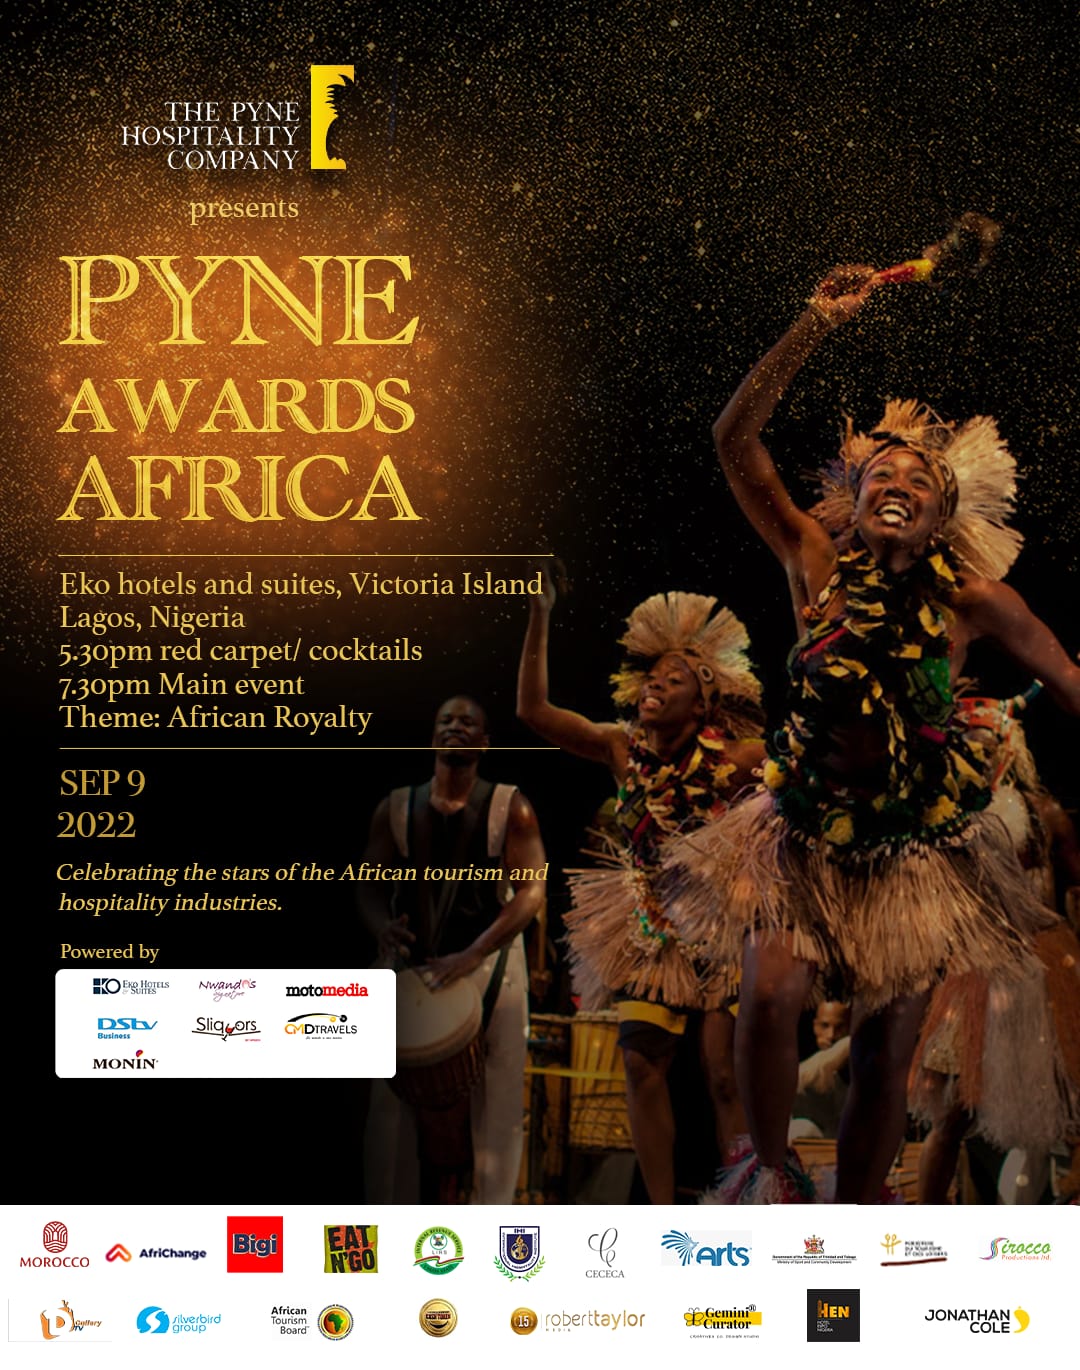 The Pyne Awards Africa to Mark 5th Anniversary as it Awards Tourism and